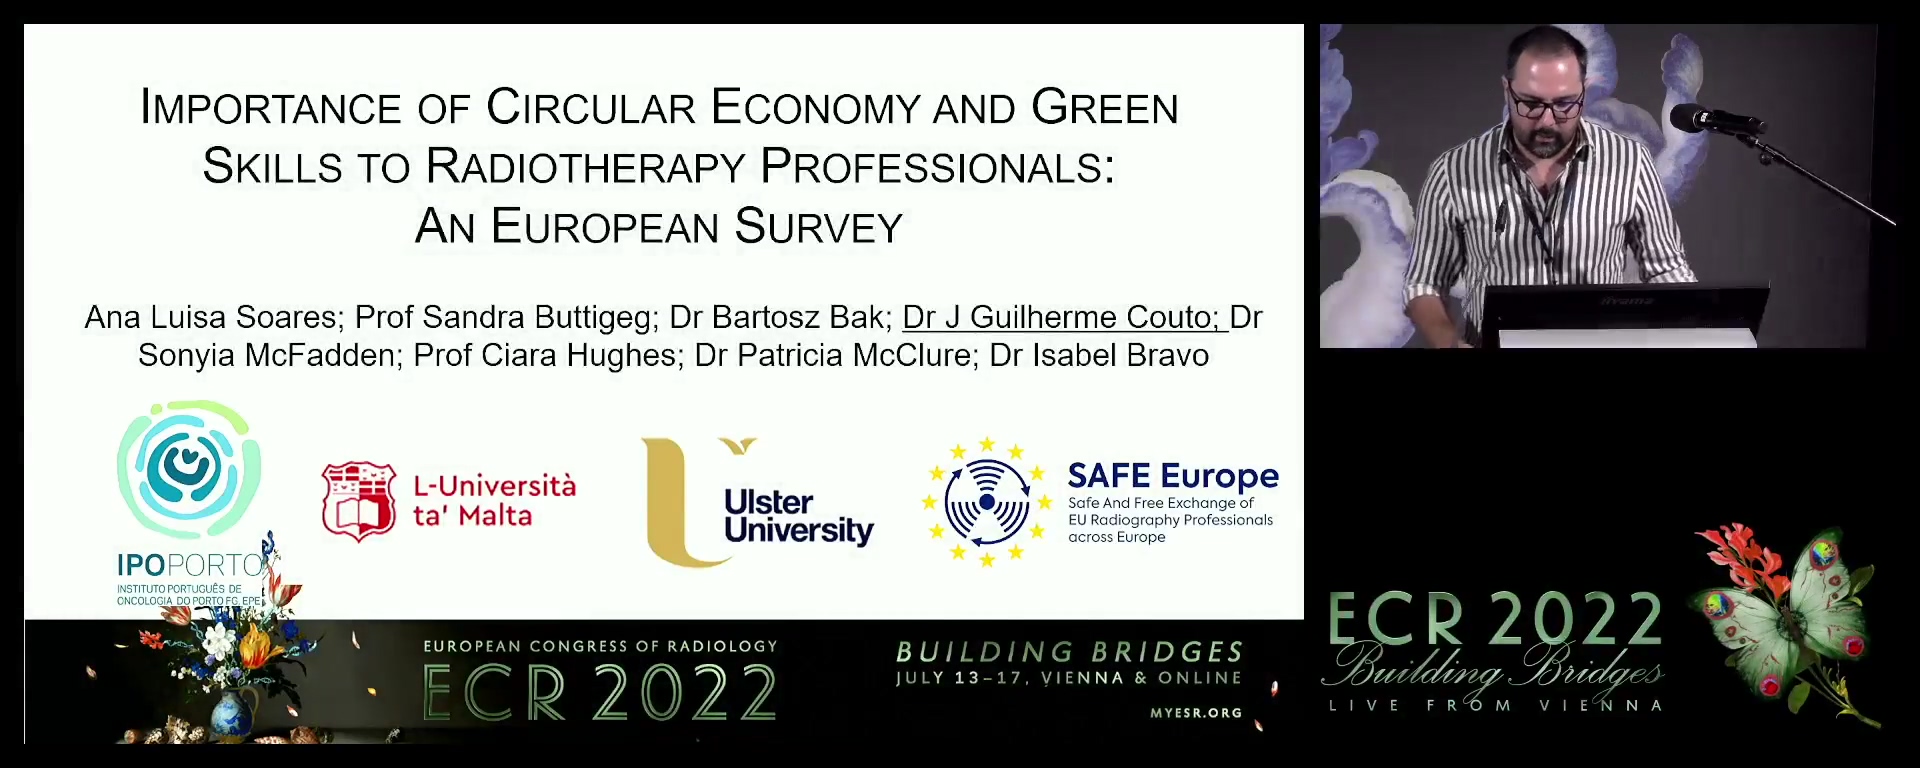 Importance of circular economy and green skills to radiation therapists: a European Union (EU) survey - Jose Guilherme Couto, Msida / MT